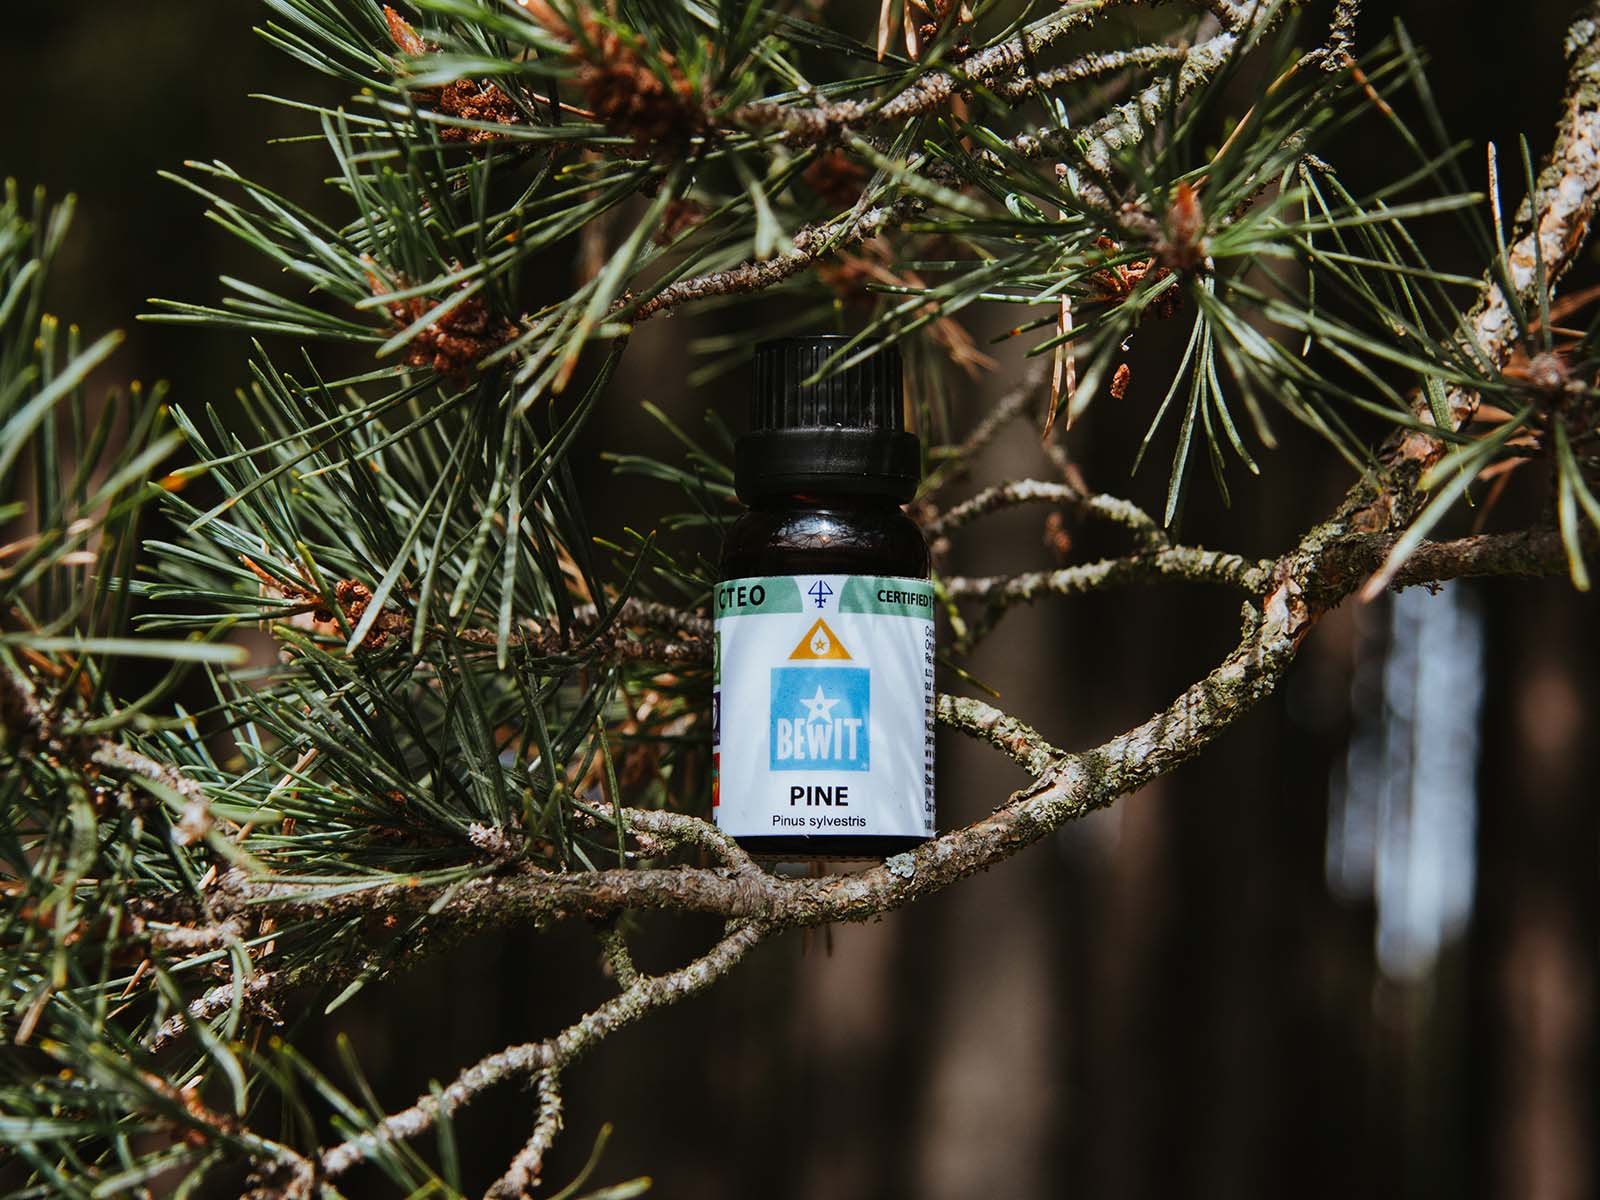 BEWIT Pine - This is a 100% pure essential oil - 4